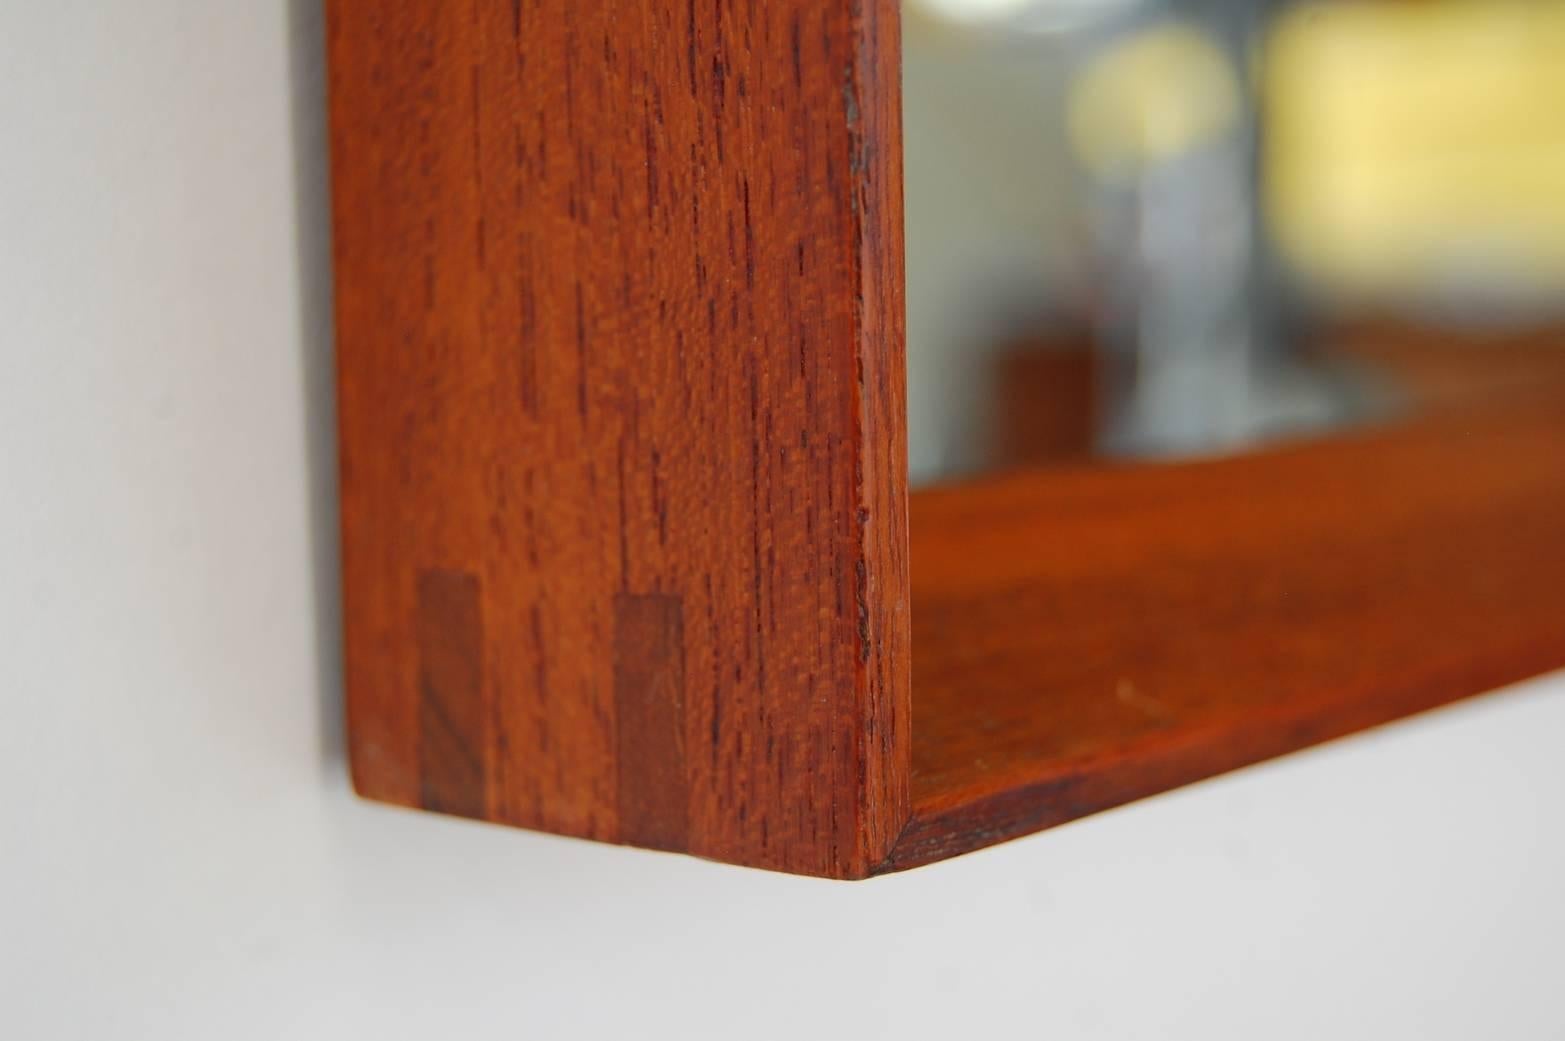 Wall shelf and mirror in teak by Ludvig Pontoppidan, Copenhagen, Denmark, circa 1959. Mirror is framed in teak. Shelf is in teak as well, and has a beautifully turned teak knob. Face of shelf unit folds down/out to reveal a small storage